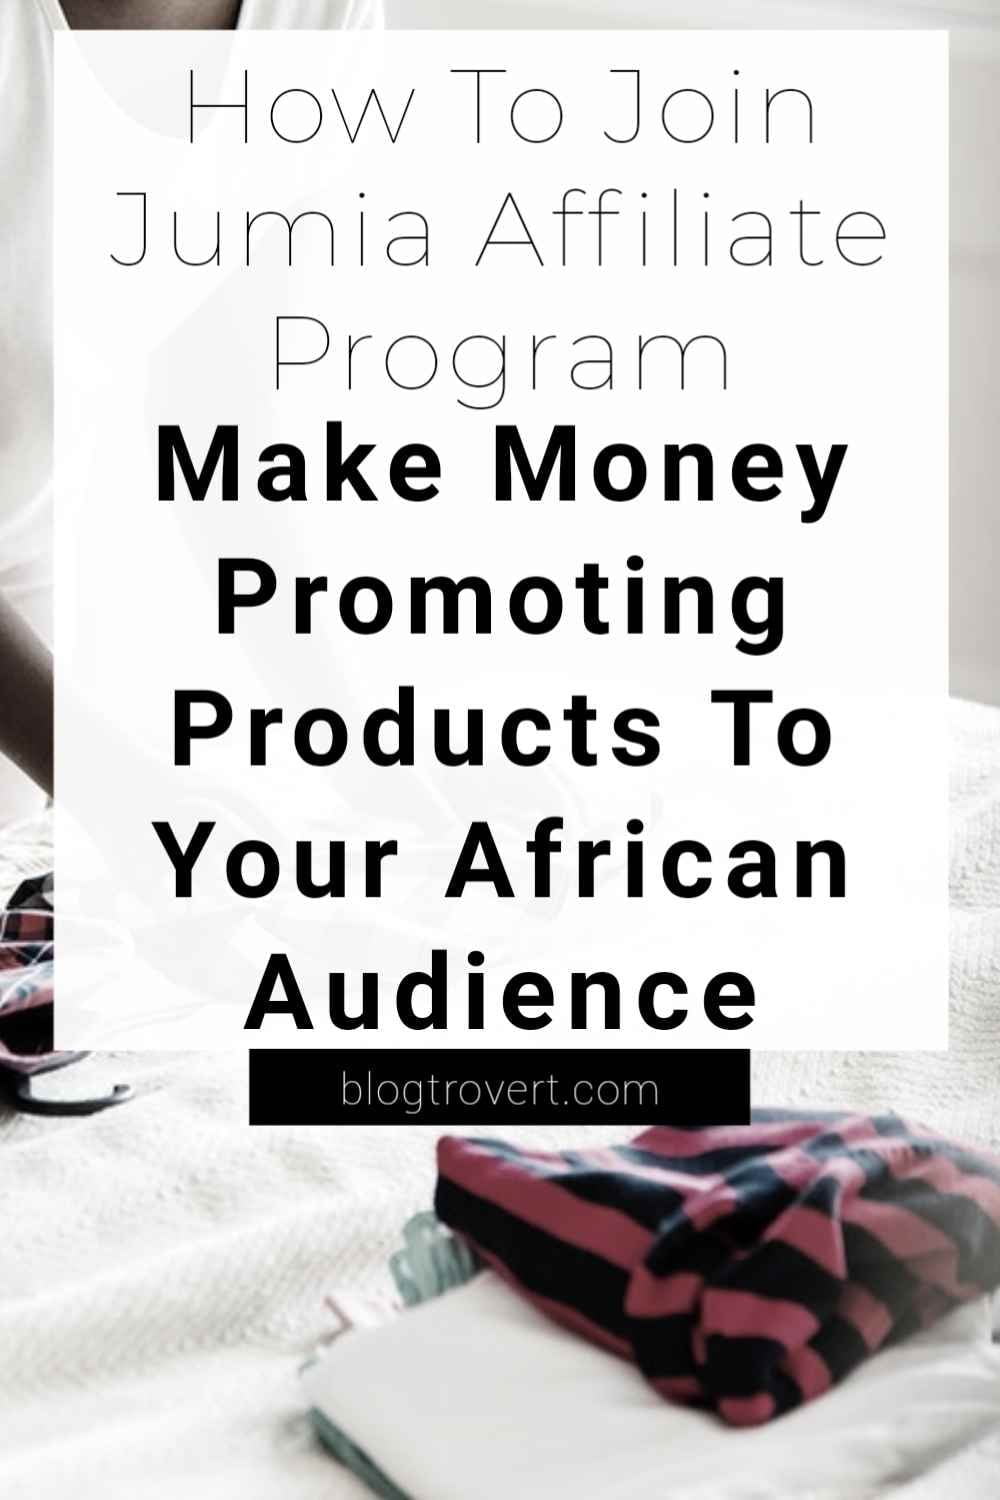 How to make money with Jumia affiliate program - the ultimate guide 6